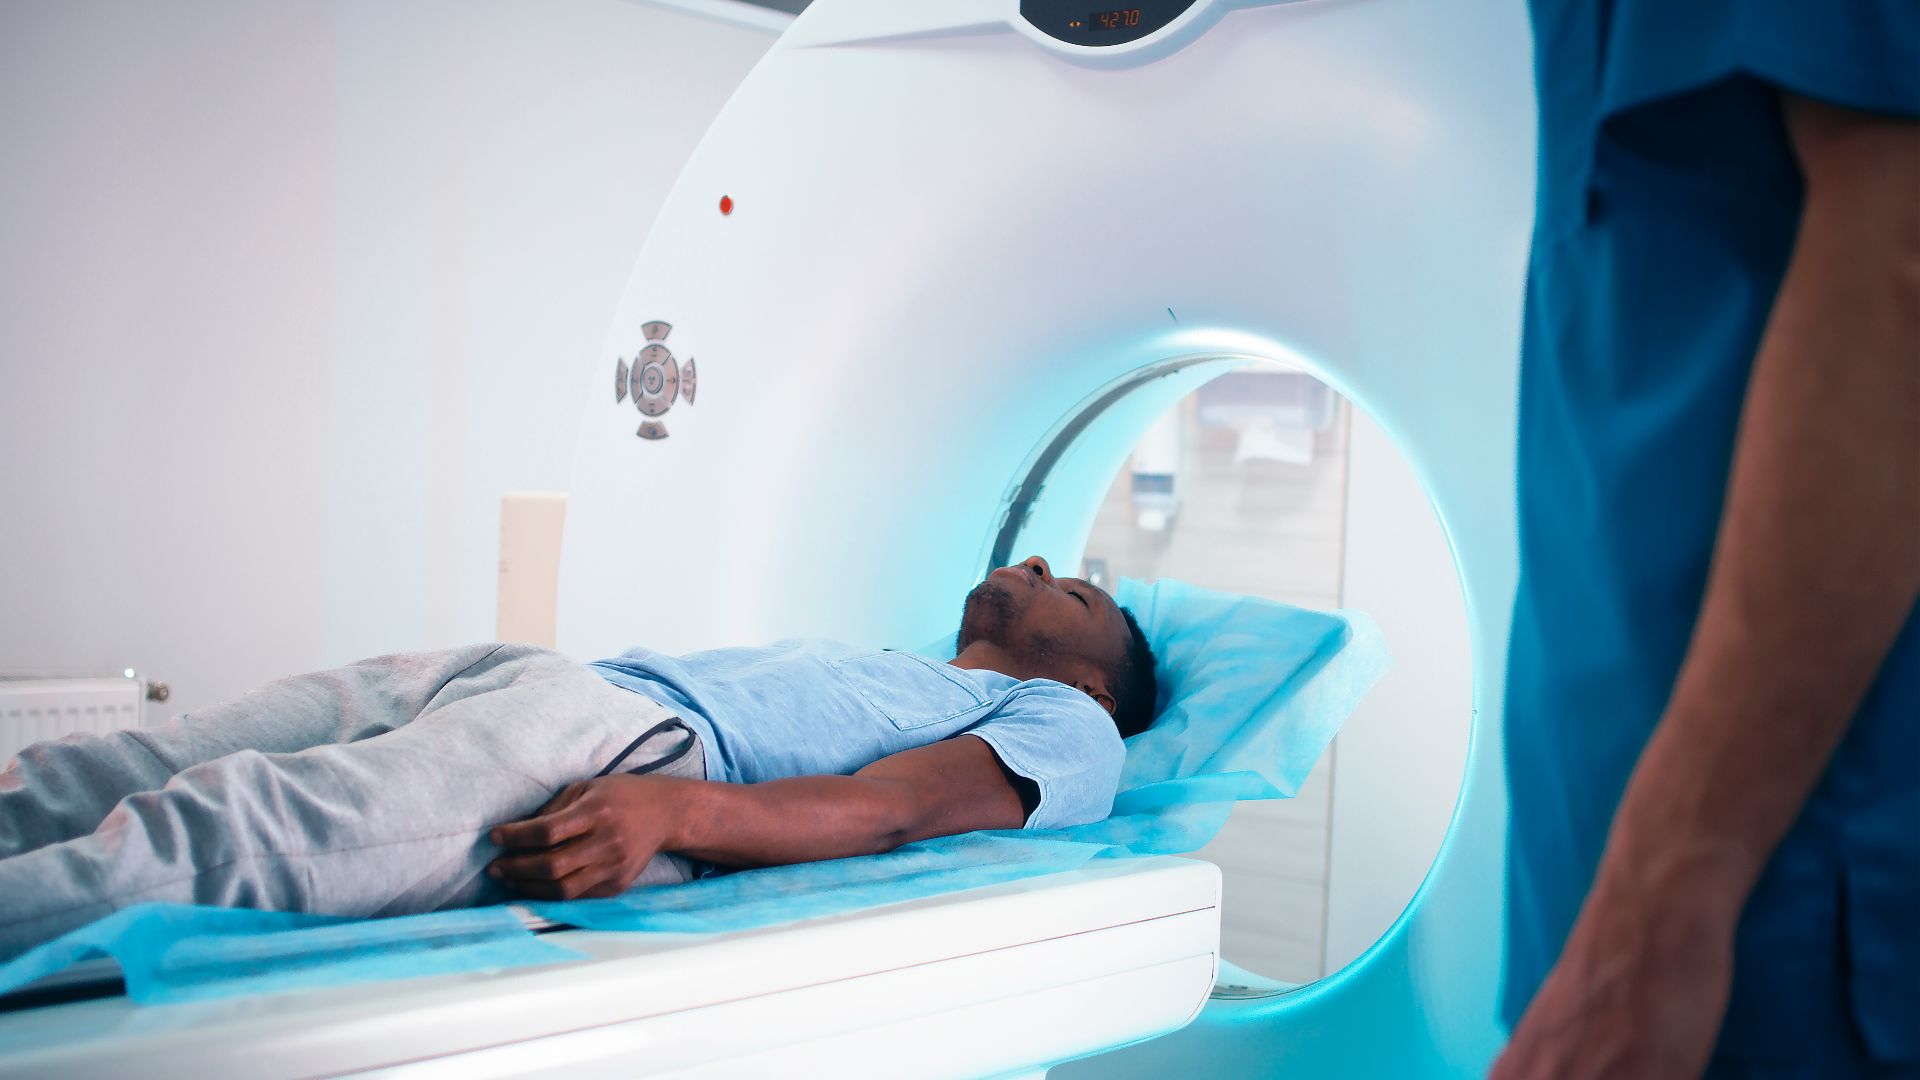 MRI vs. CT Scans: Differences, Benefits, and Uses